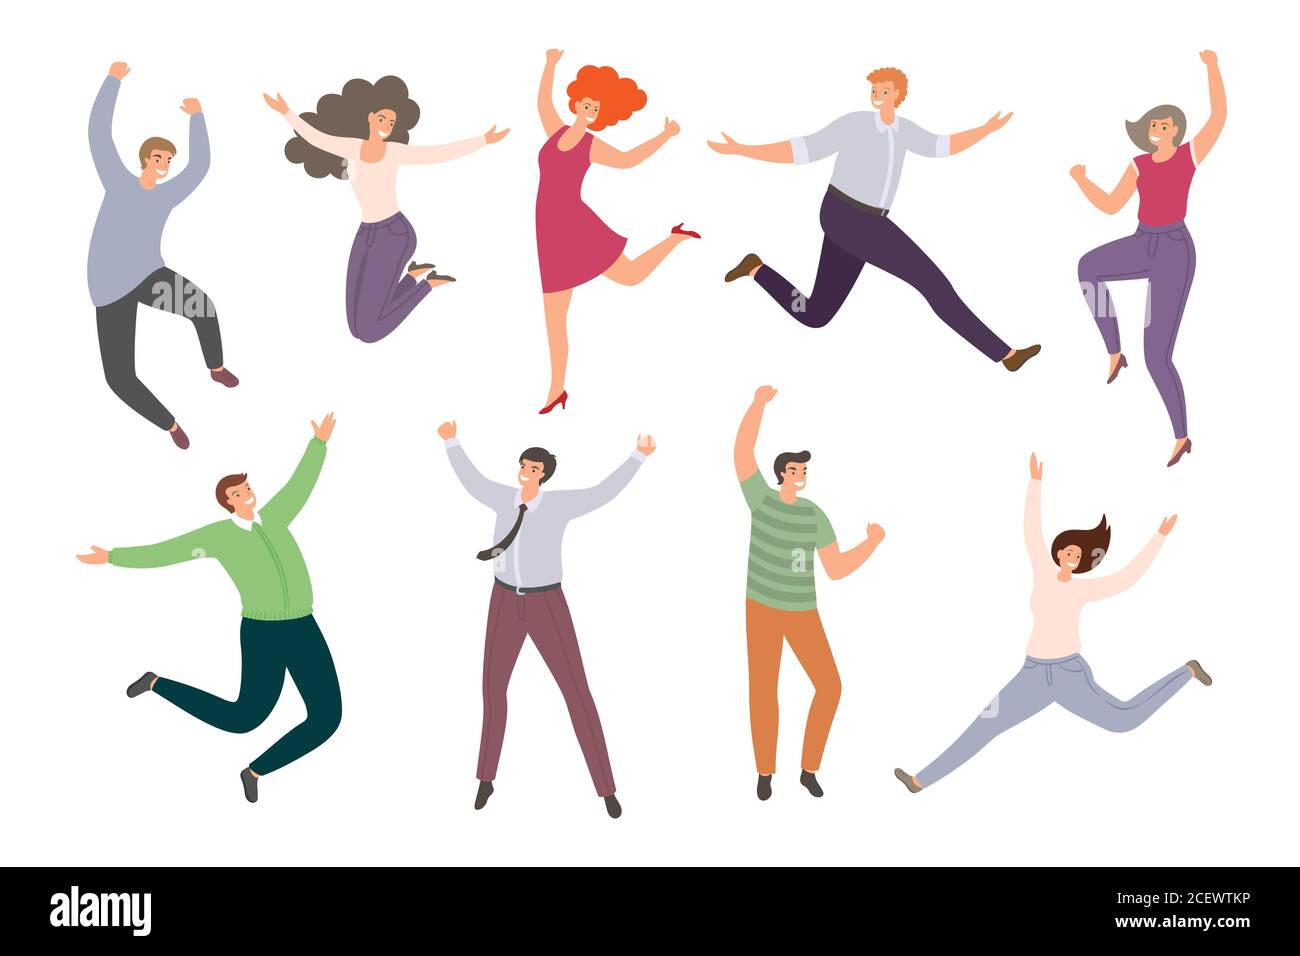 Group of happy jumping people in flat style isolated on white background. Hand-drawn collection of funny cartoon women and men. Stock Vector